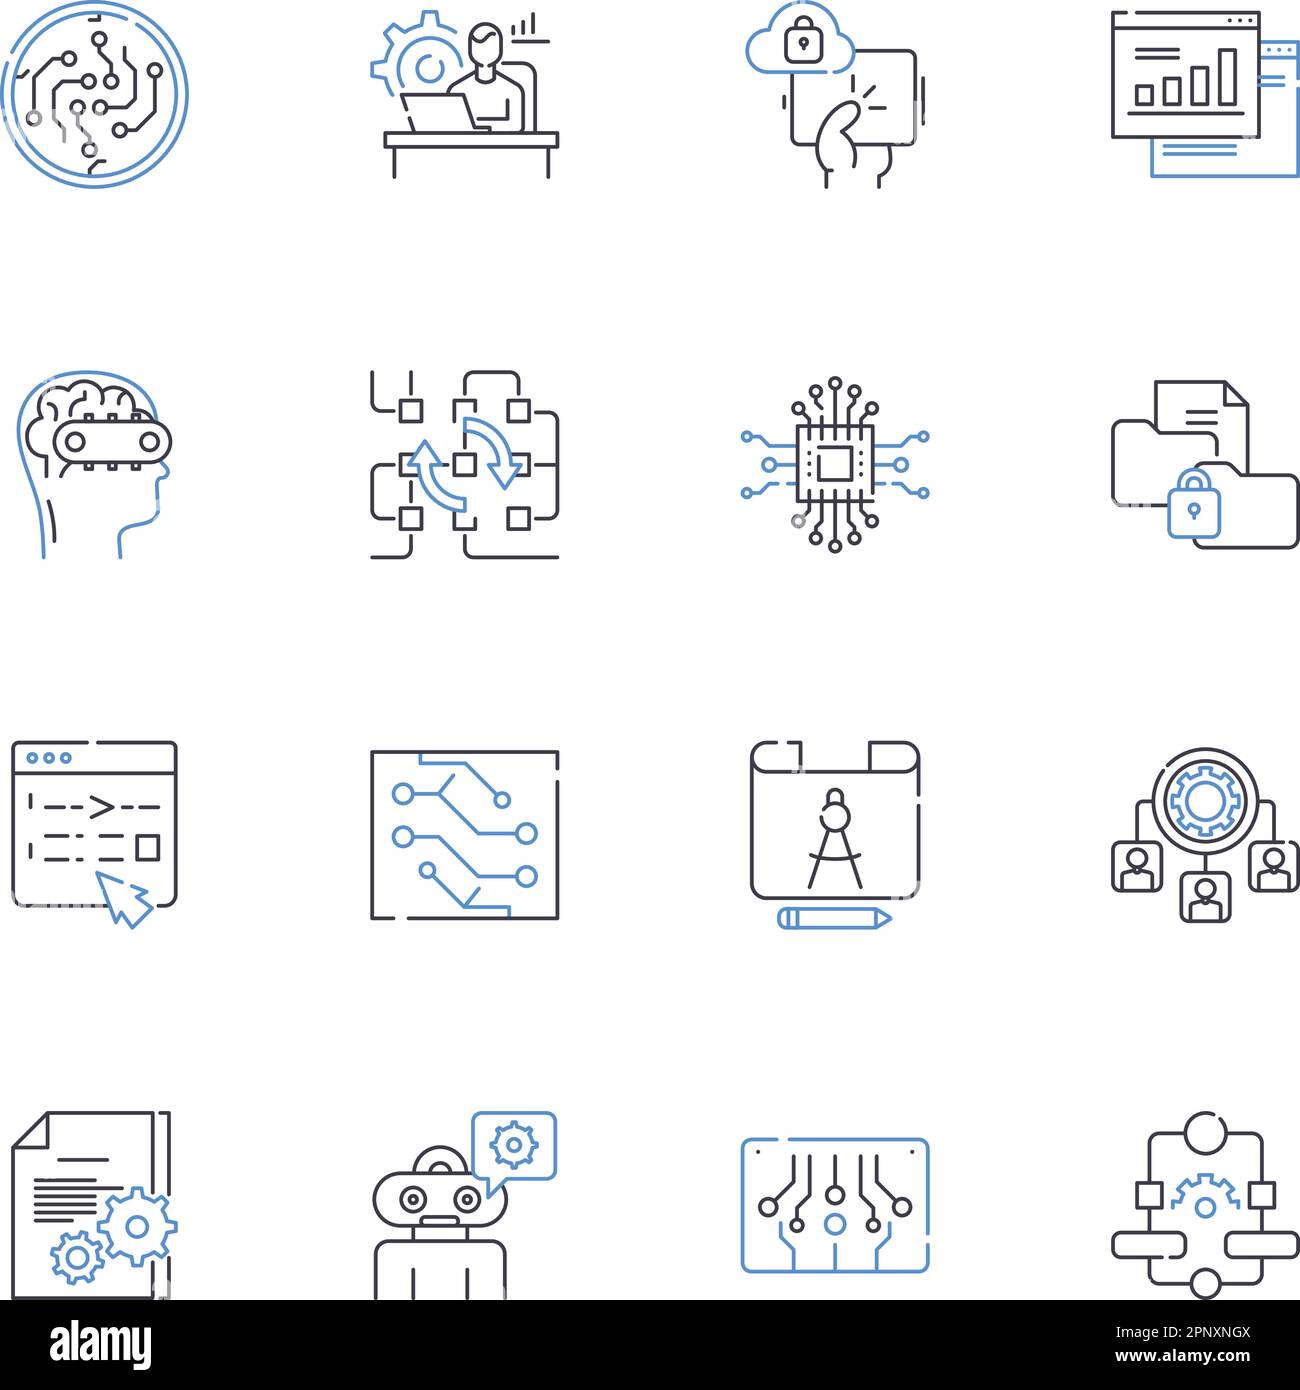 Source code line icons collection. Programming, Scripting, Development, Codebase, Coding, Syntax, Compilation vector and linear illustration Stock Vector